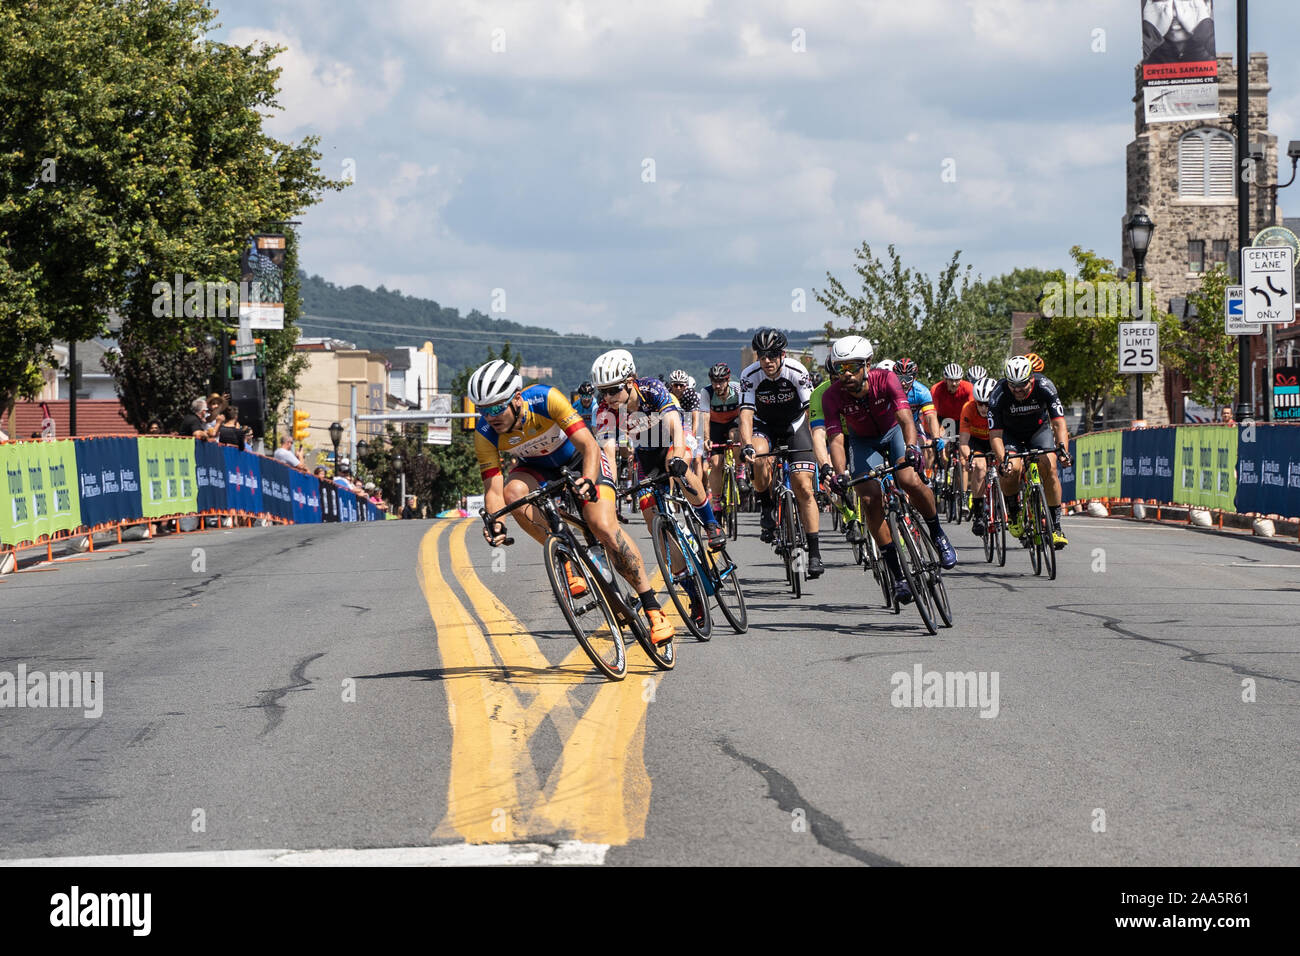 West Reading, Pa, USA- August 3, 2019: Pack of men cyclist athletes competing in cycling bike race, riding towards camera. Stock Photo